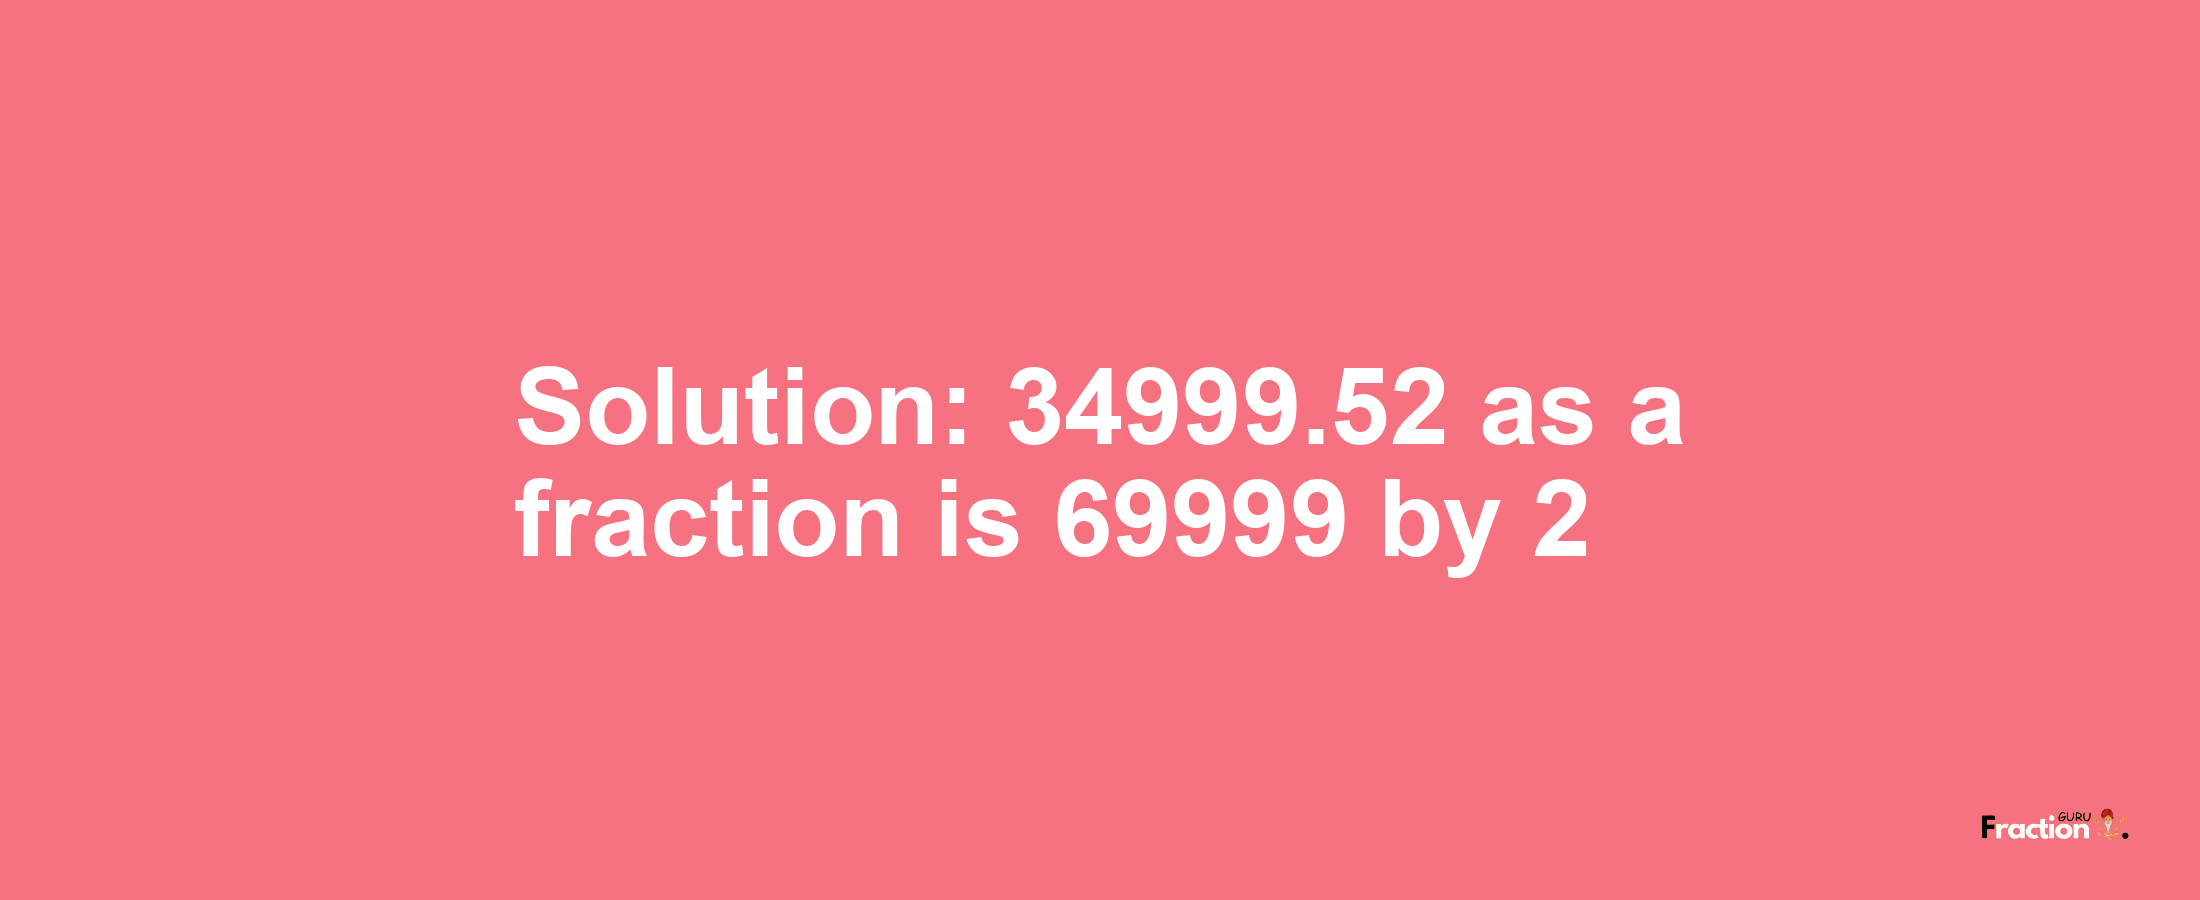 Solution:34999.52 as a fraction is 69999/2